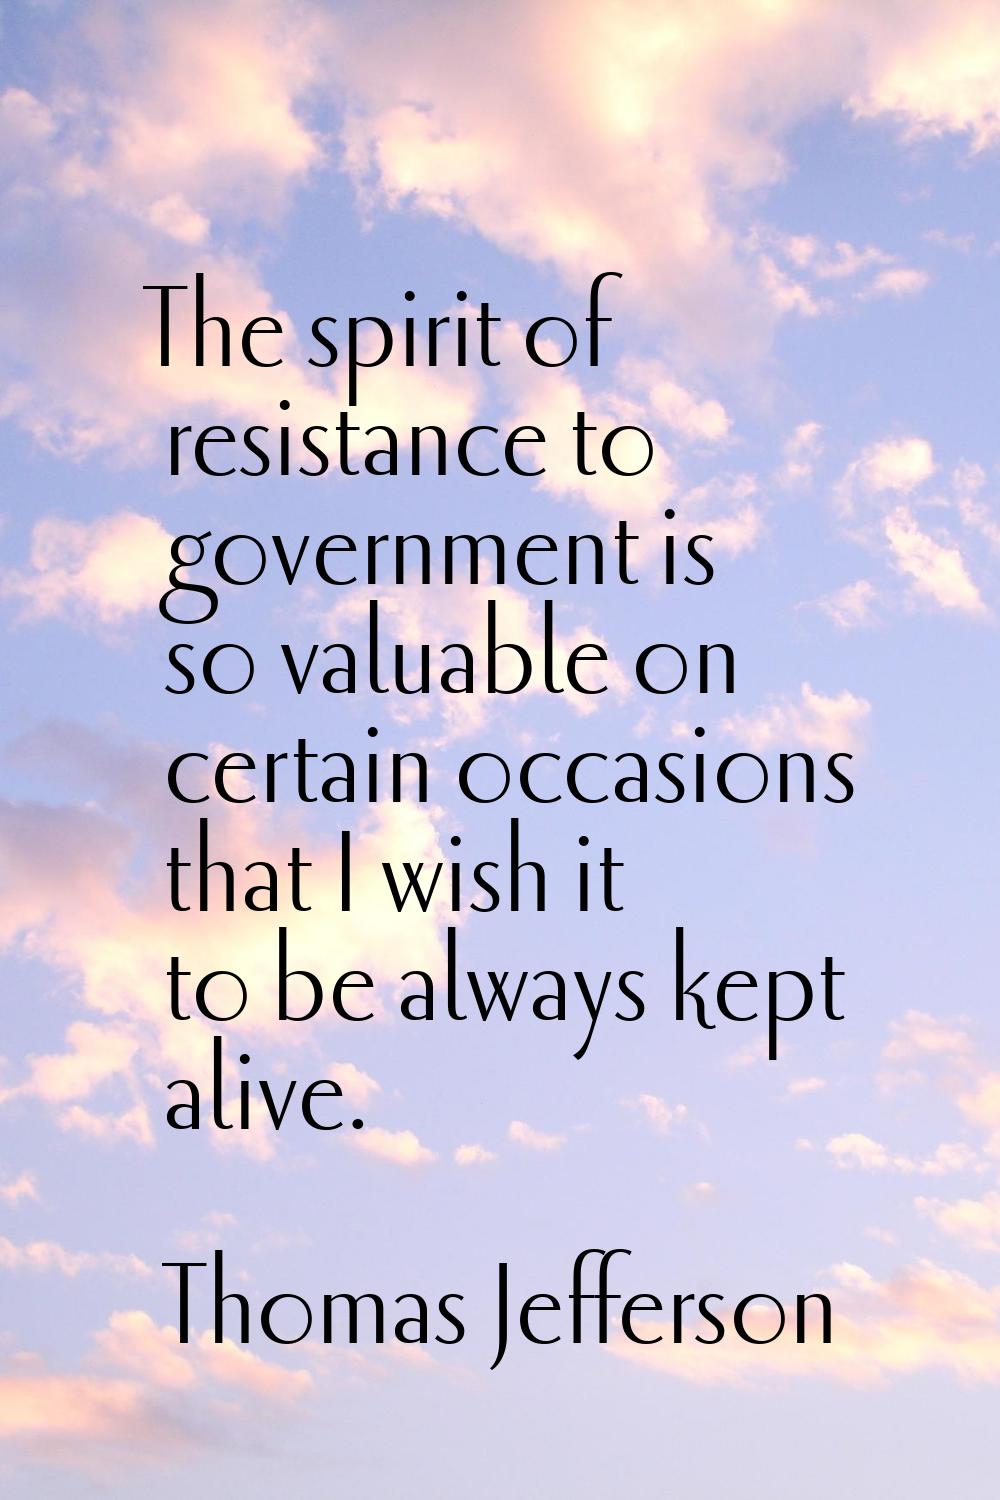 The spirit of resistance to government is so valuable on certain occasions that I wish it to be alw